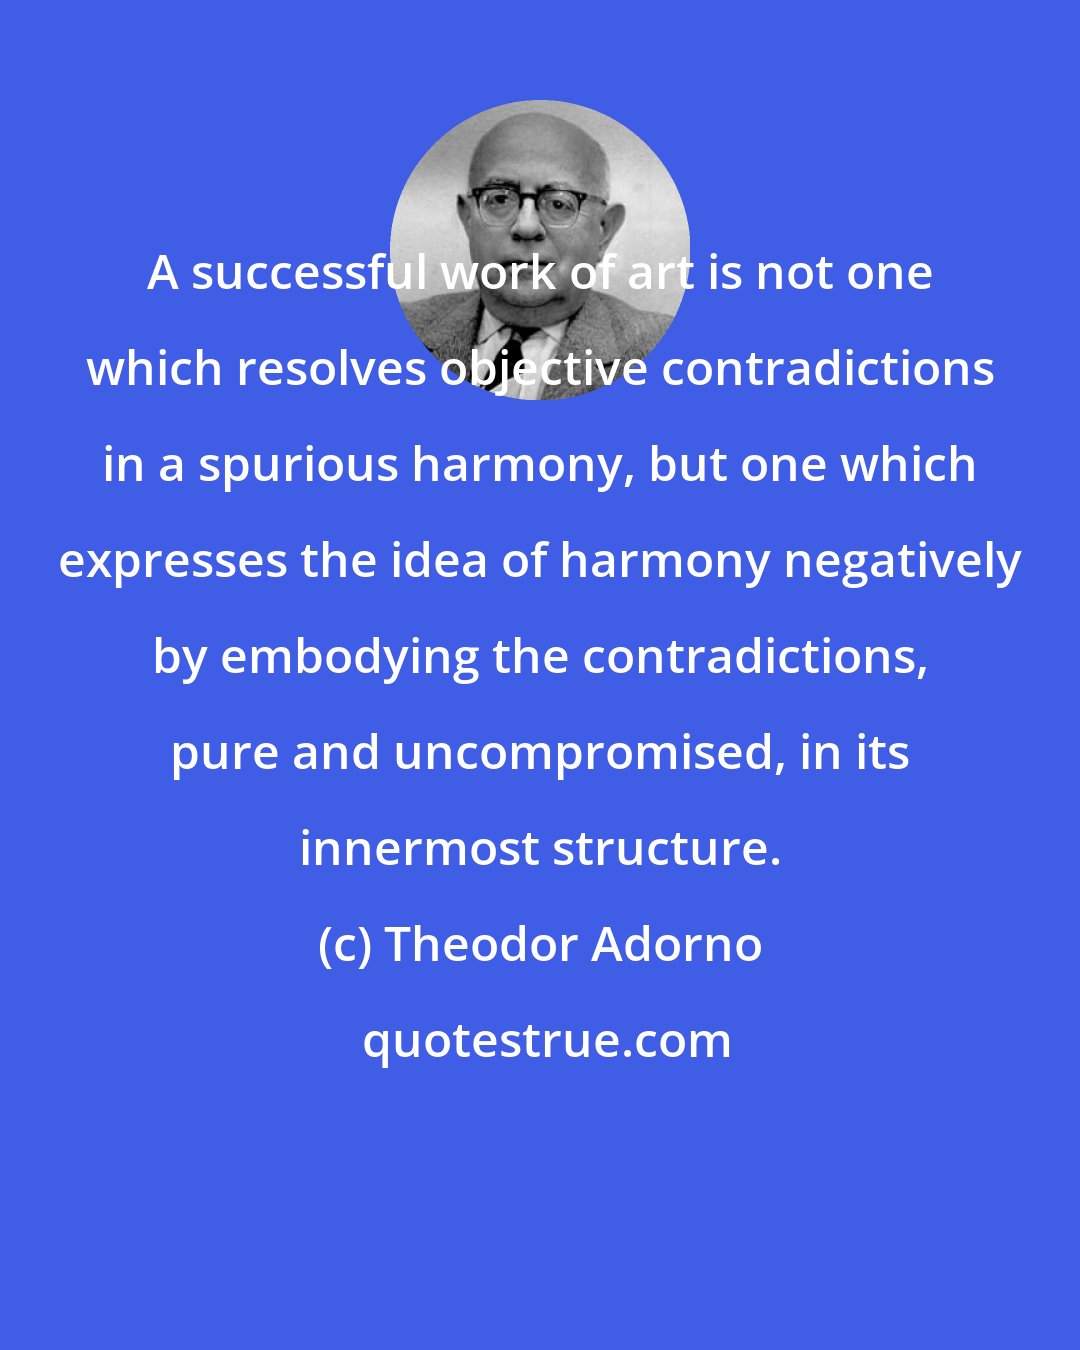 Theodor Adorno: A successful work of art is not one which resolves objective contradictions in a spurious harmony, but one which expresses the idea of harmony negatively by embodying the contradictions, pure and uncompromised, in its innermost structure.